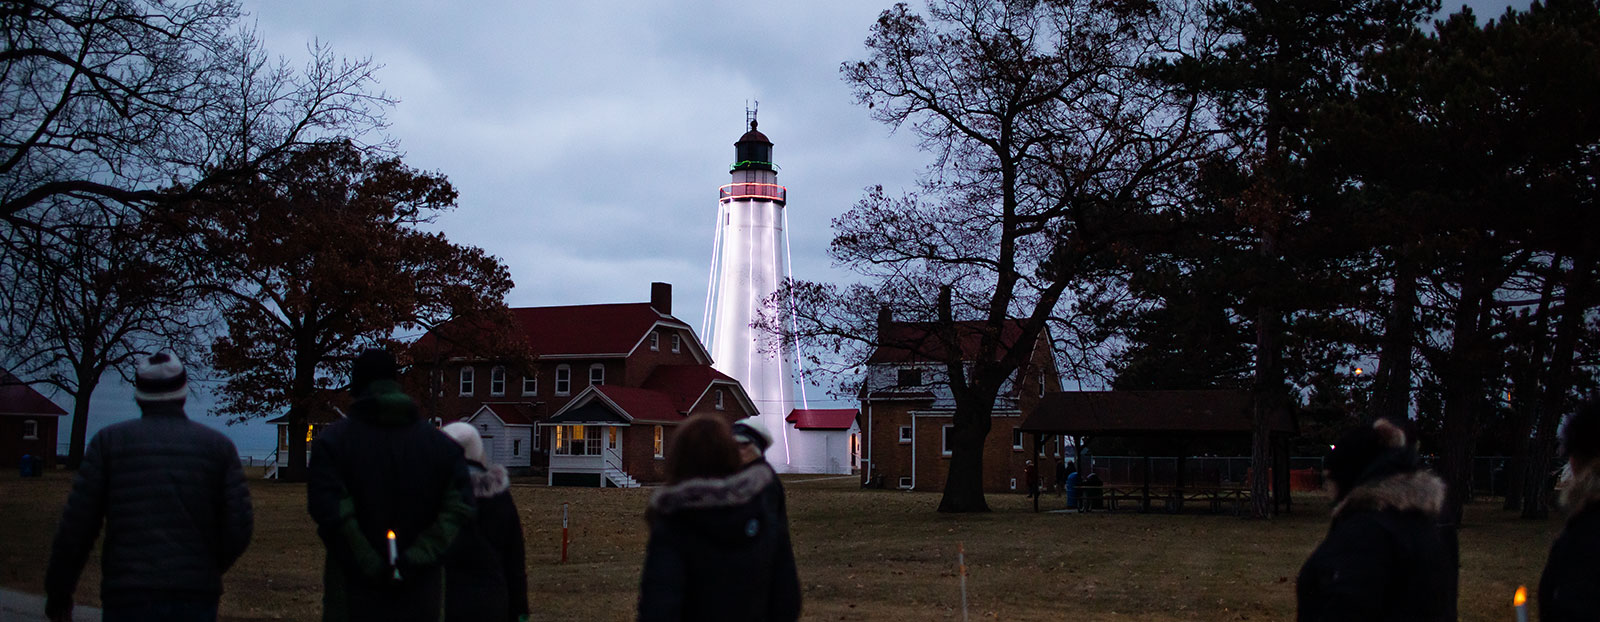 The Fort Gratiot Light Station is a beacon on the St. Clair River.